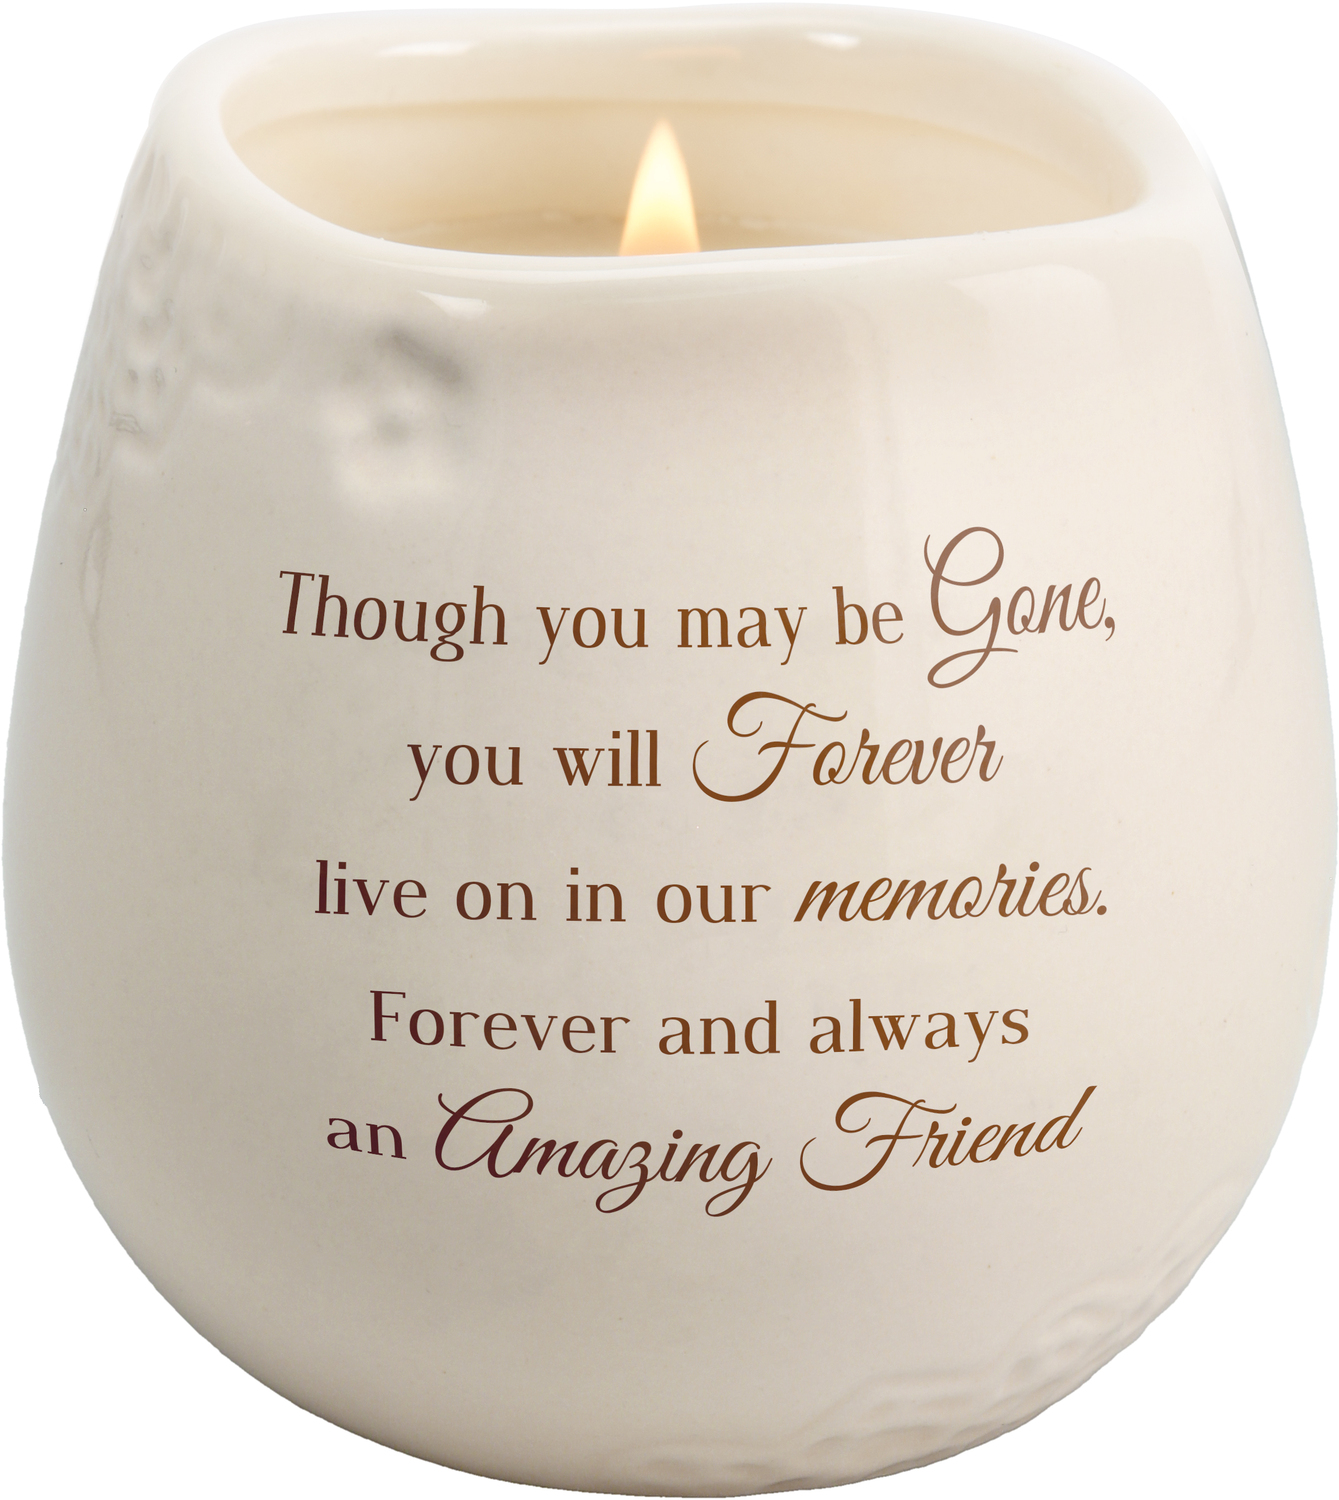 Amazing Friend by Light Your Way Memorial - Amazing Friend - 8 oz - 100% Soy Wax Candle
Scent: Tranquility